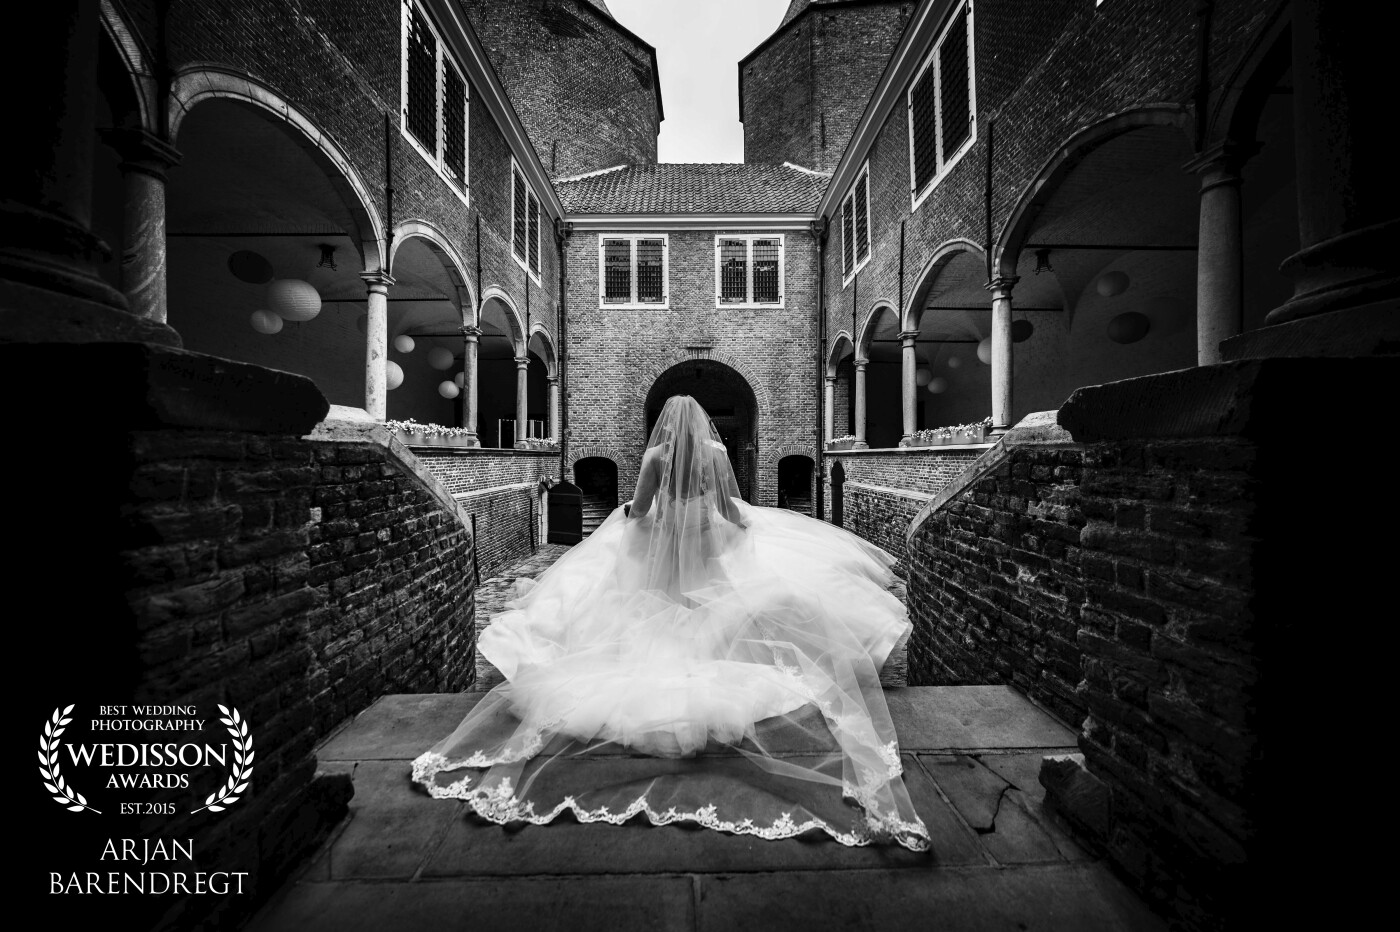 "Kasteel Dussen" was the beautiful wedding location for Joey and Aniek. This picture is made on the perfect time and on the perfect place. <br />
We just did the official wedding shoot and we all walked back to take some rest. When the bride entered the stairs to go down, her dress felled perfectly. There was no time for doing anything about the composition: shoot! 